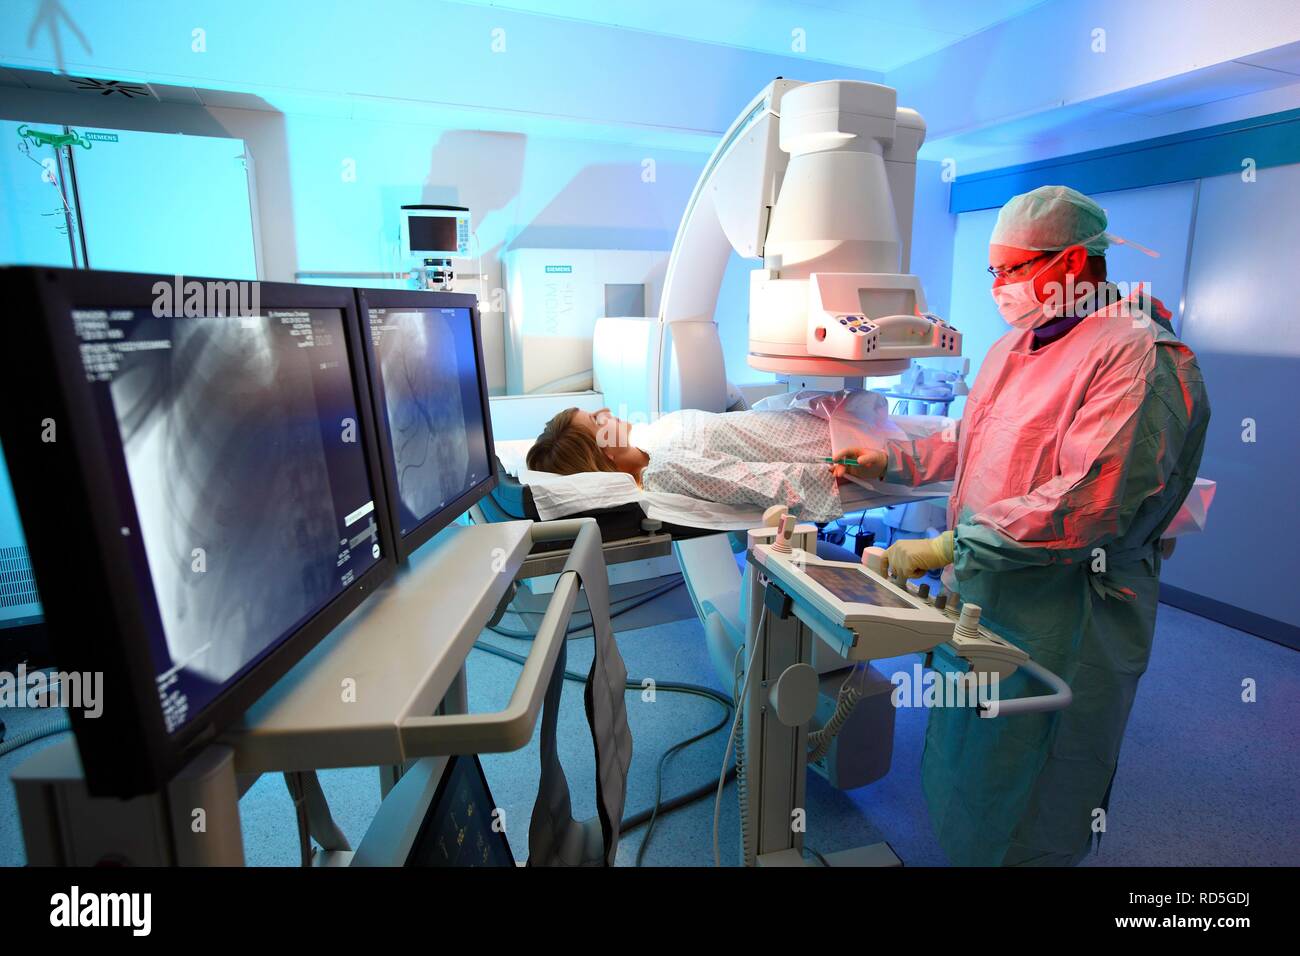 Diagnostic and interventional radiology, angiography, examination and treatment for vascular diseases, hospital Stock Photo